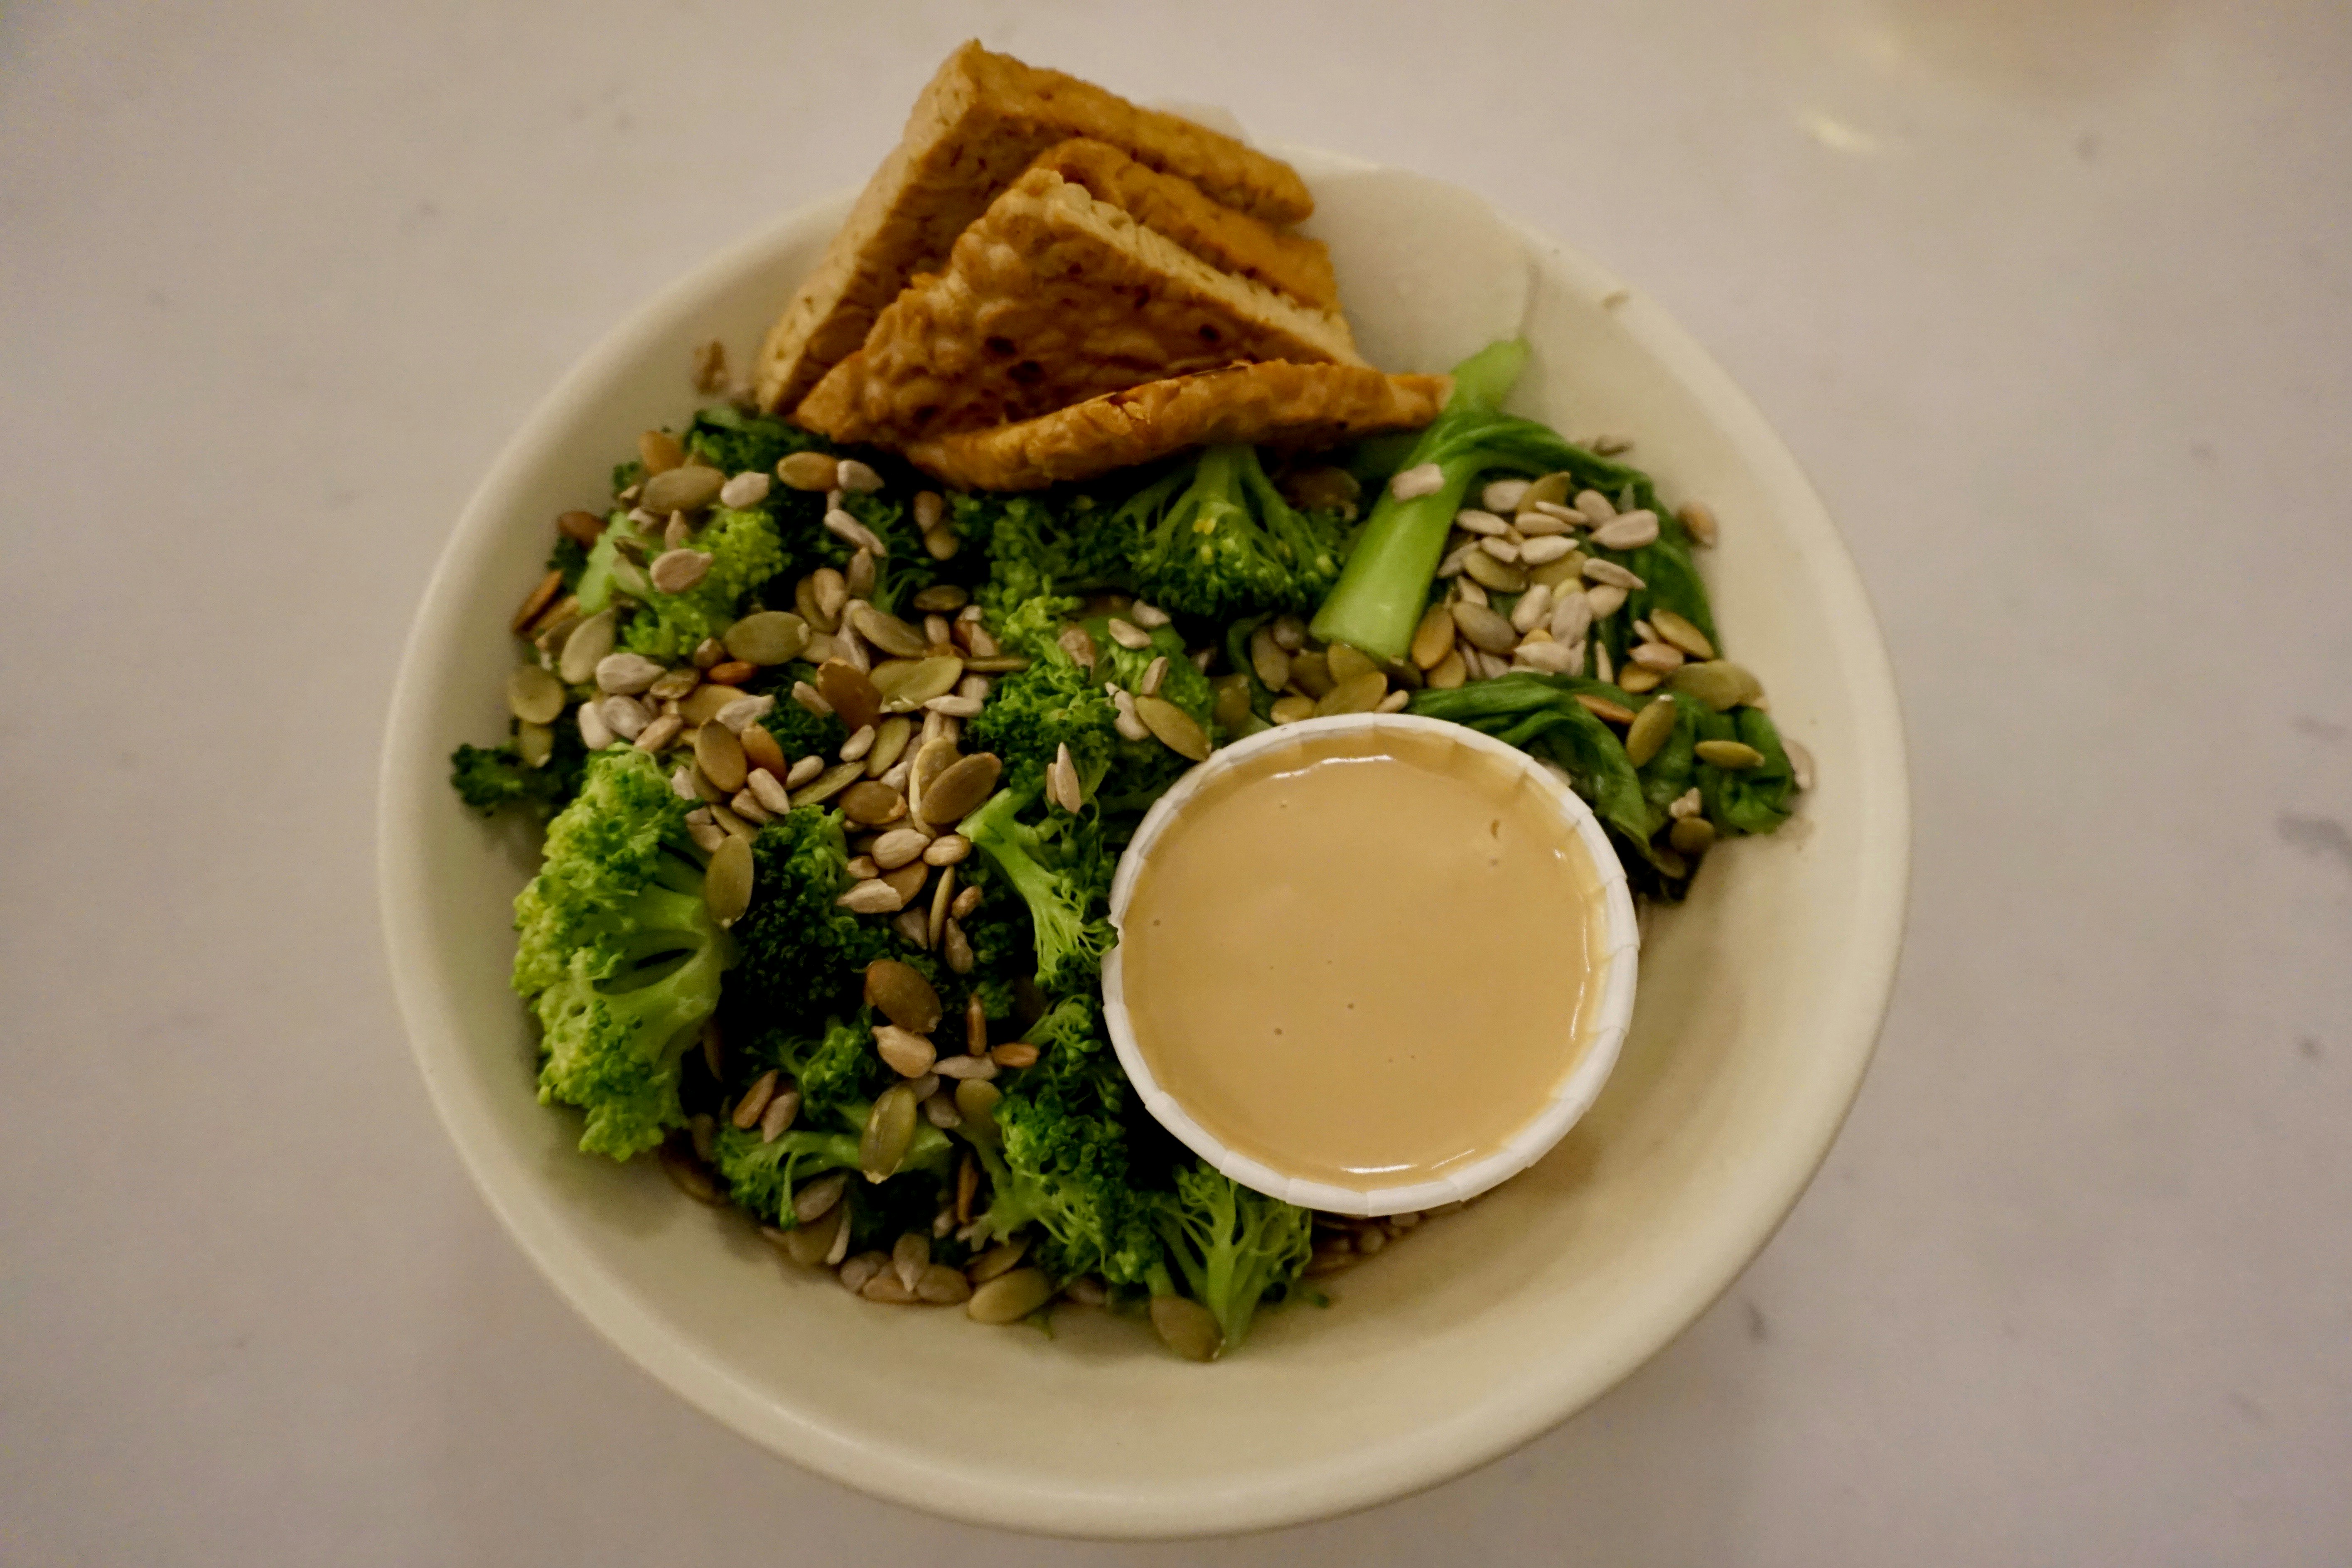 A white bowl, filled with broccoli, nuts, seeds, flatbread and a small container of satay sauce.